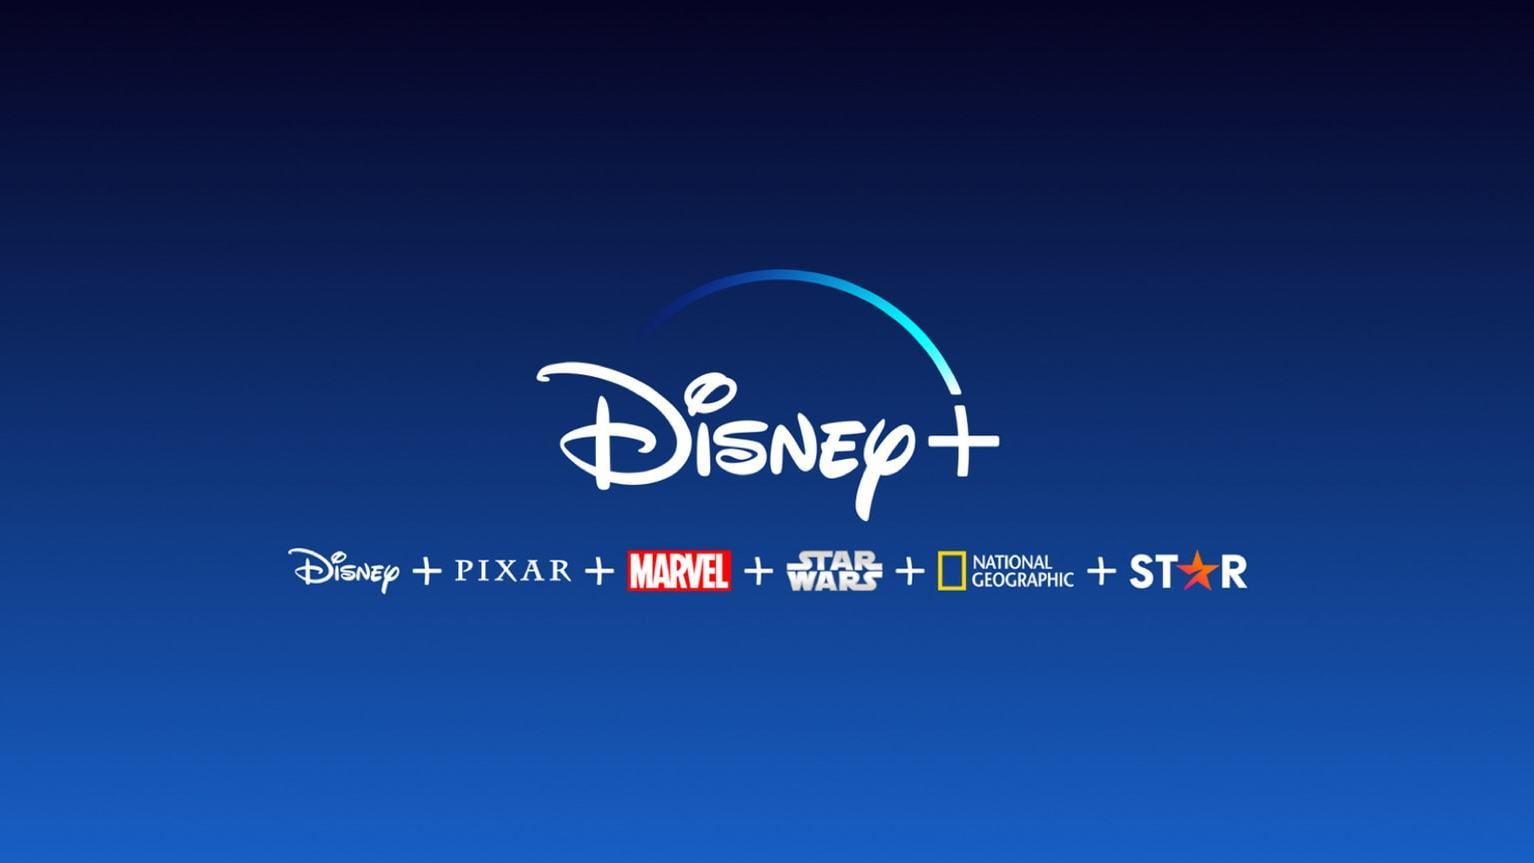 DISNEY+ ANNOUNCE CASTING AS PRODUCTION BEGINS ON UK ORIGINAL COMEDY SERIES ‘EXTRAORDINARY’